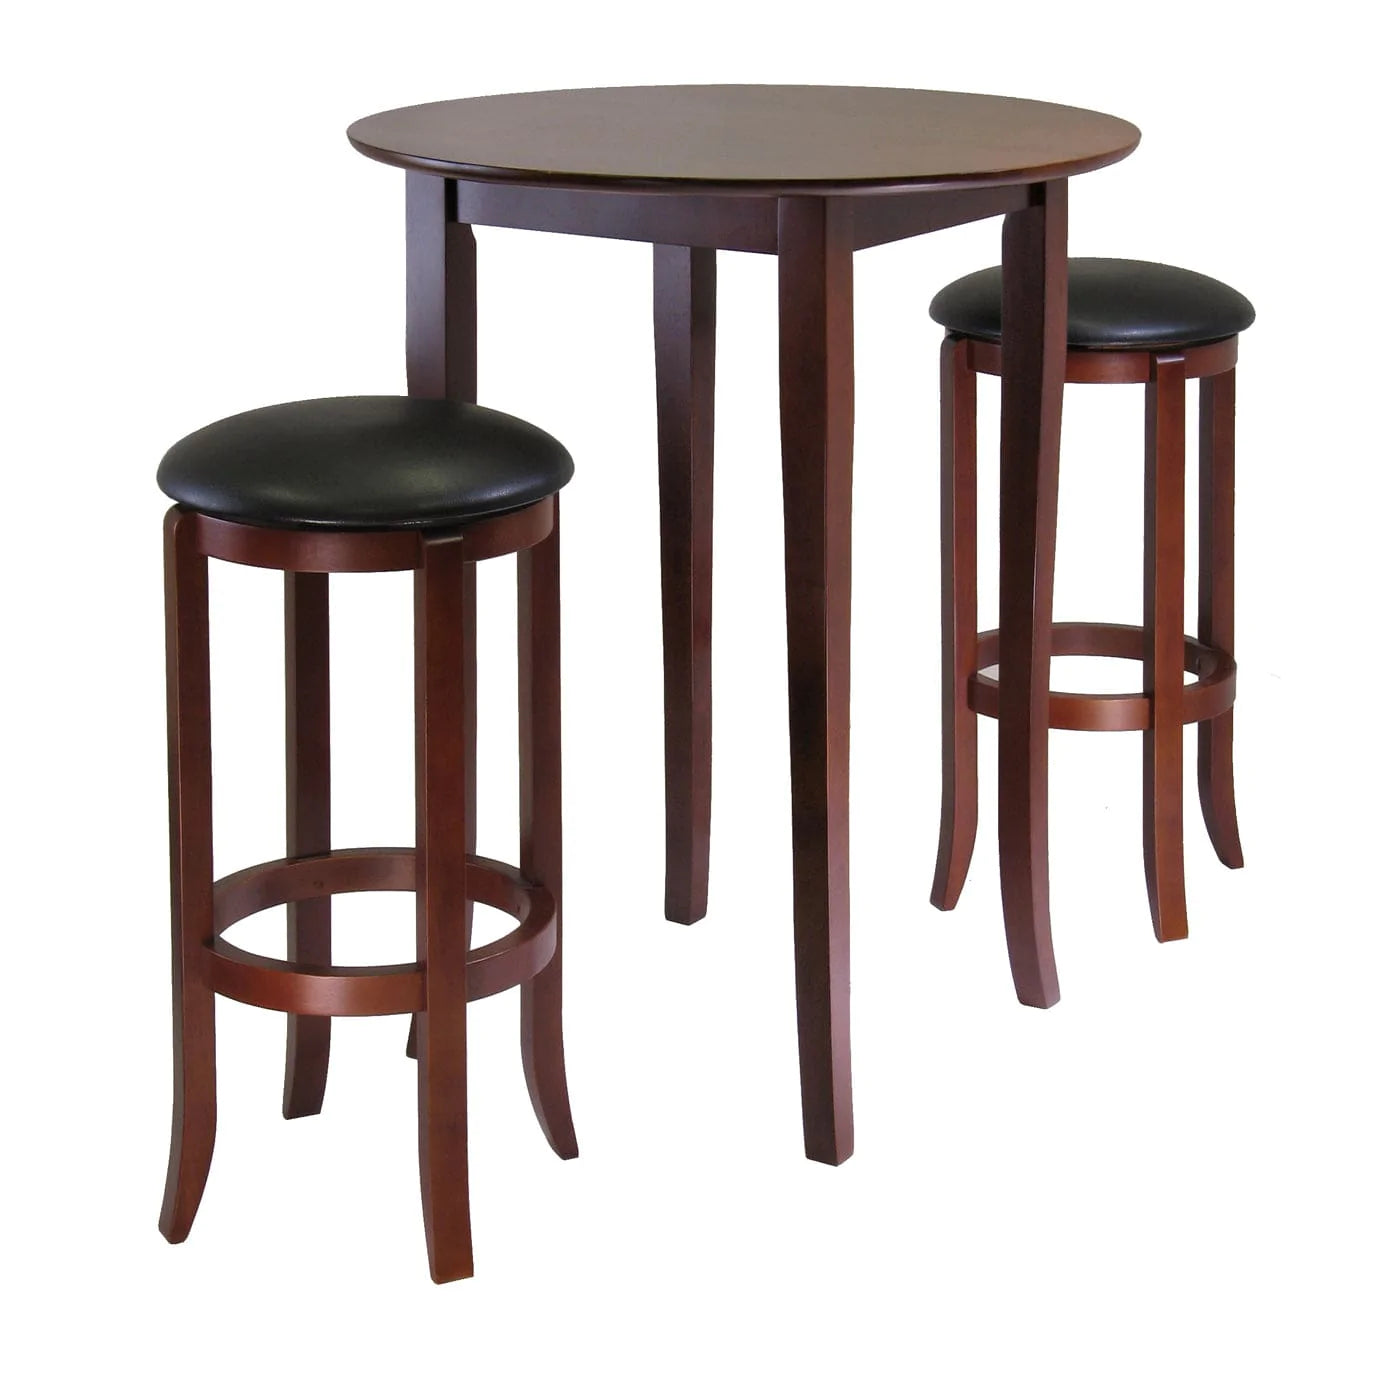 WINSOME Pub Table Set Fiona 3-Pc High Table with Cushion Swivel Seat Bar Stools, Walnut and Black